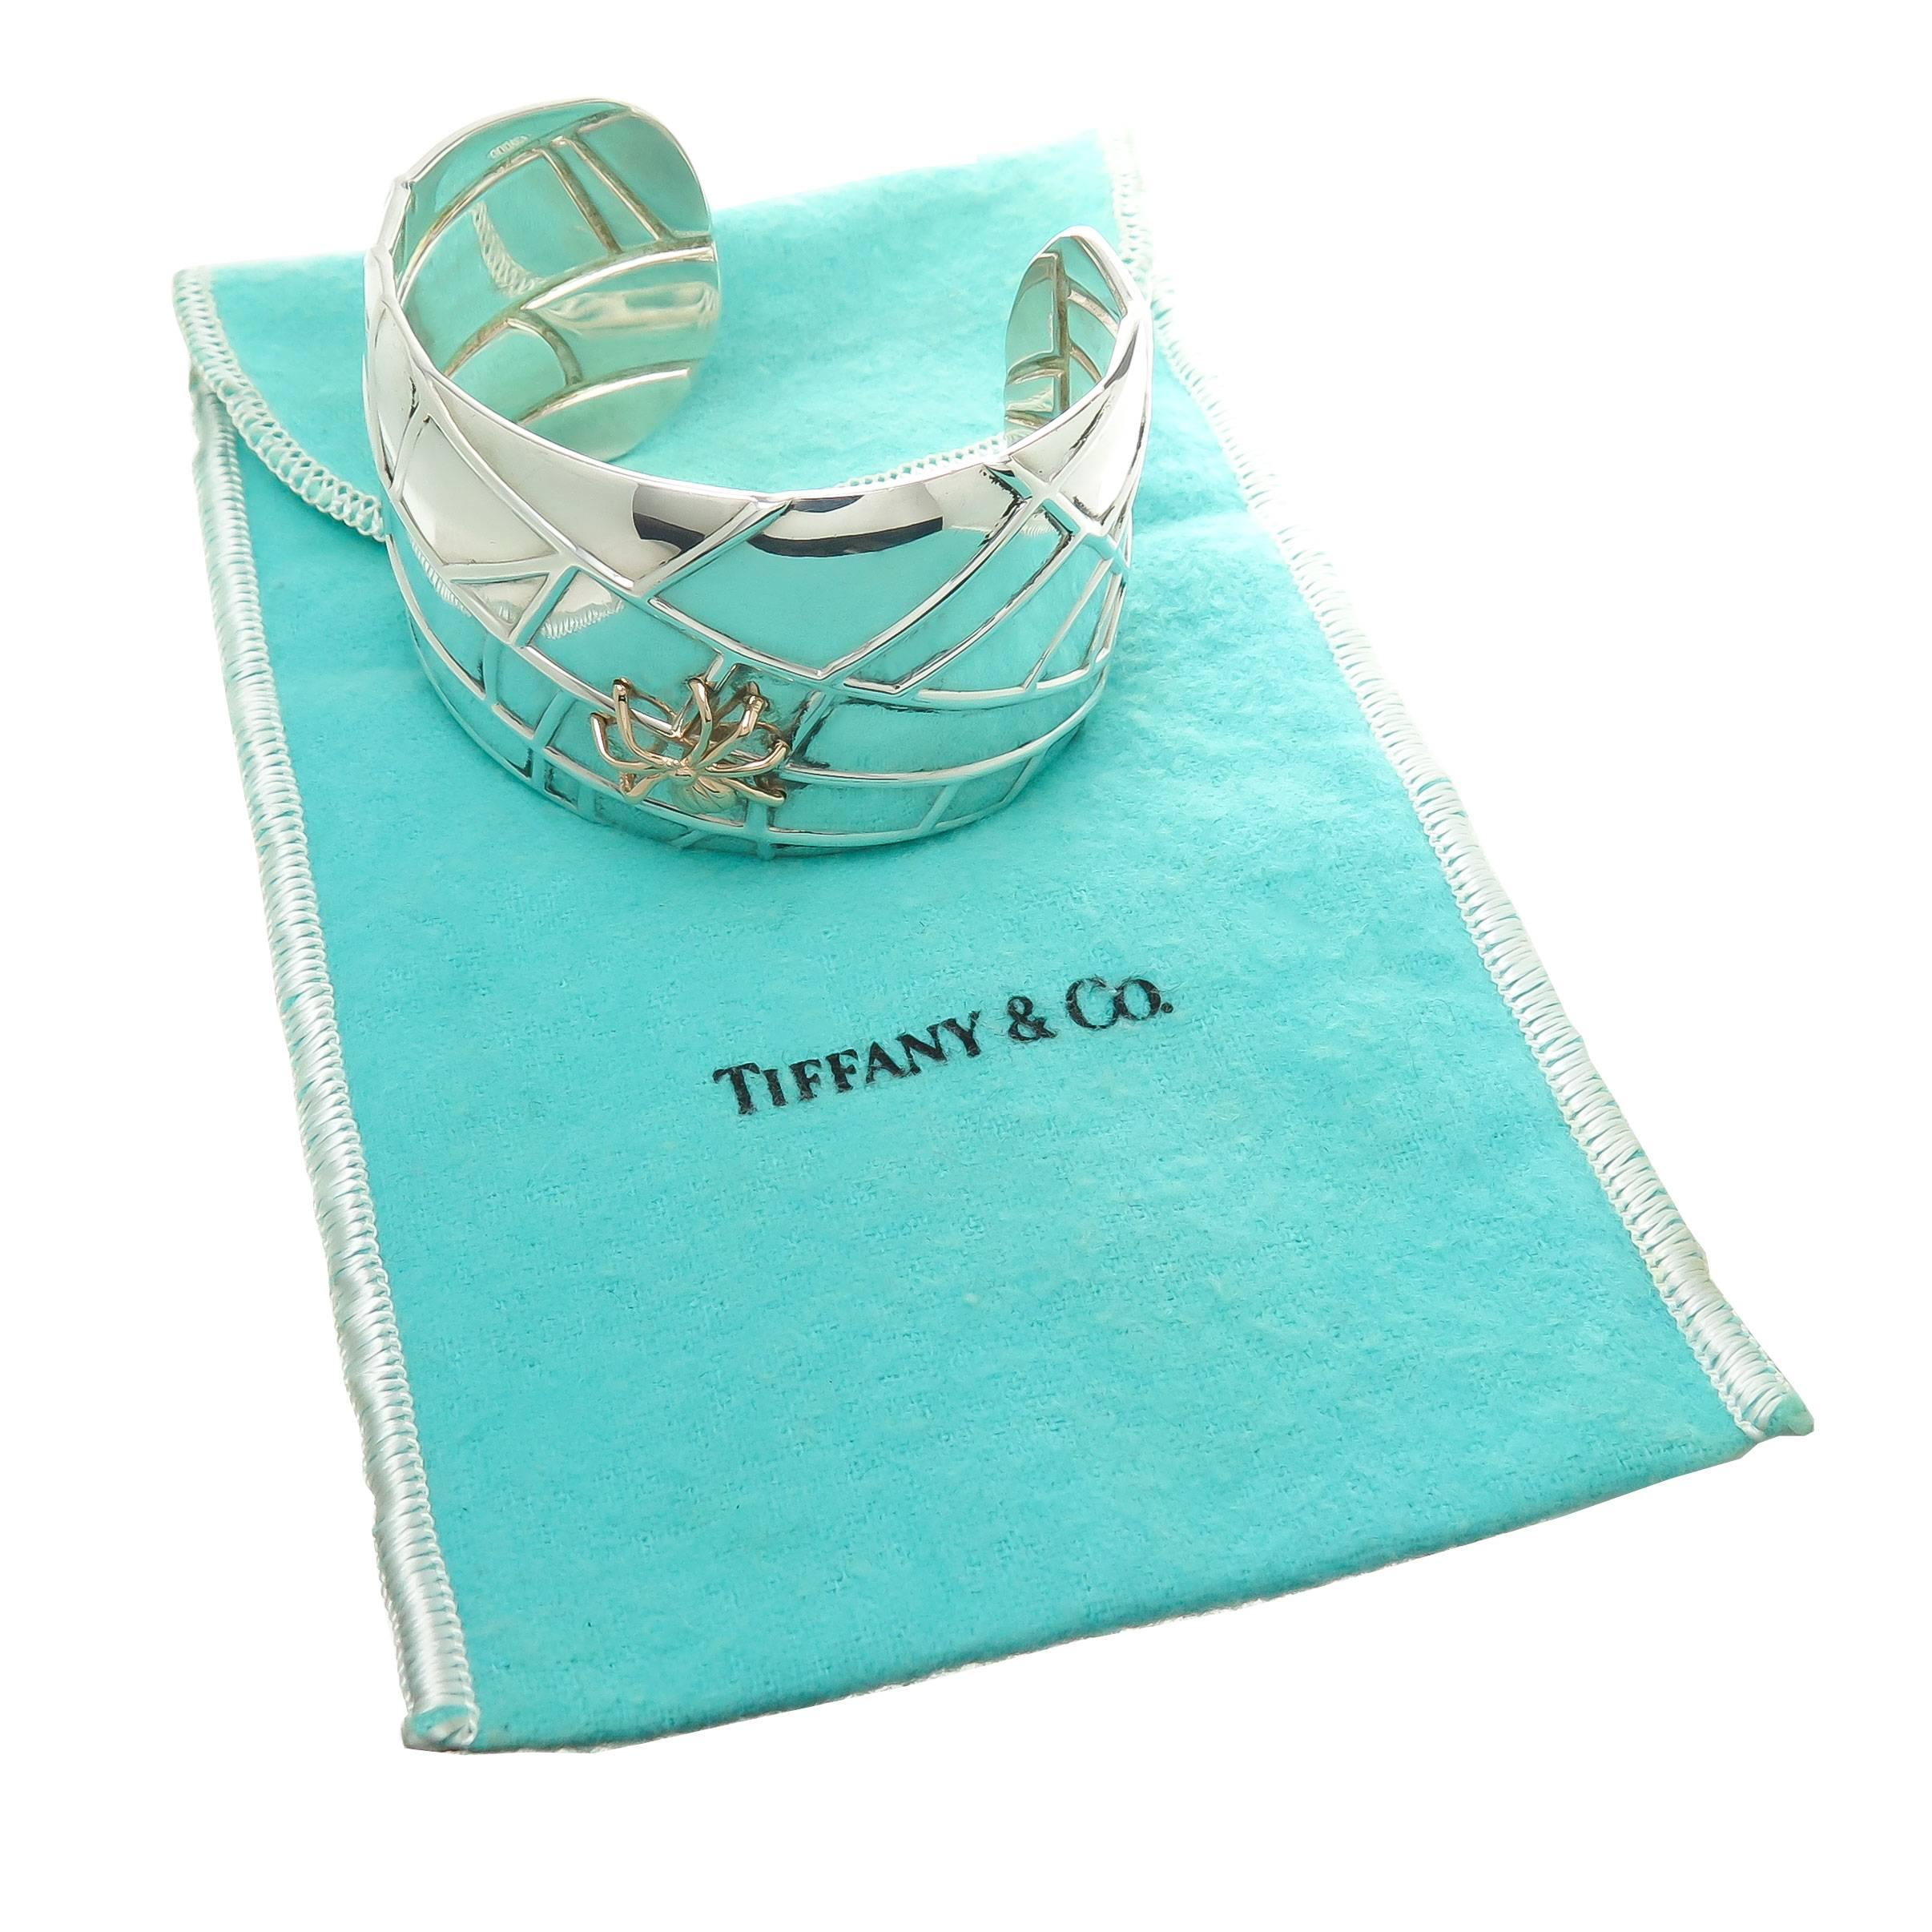 Circa 2001 Tiffany and Company Sterling silver and 18K yellow Gold Spider Web Cuff Bracelet. Measuring 1 1/2 inch wide and an opening of 1 1/8 inch and can be adjusted to fit most any wrist. Comes in original Tiffany pouch.